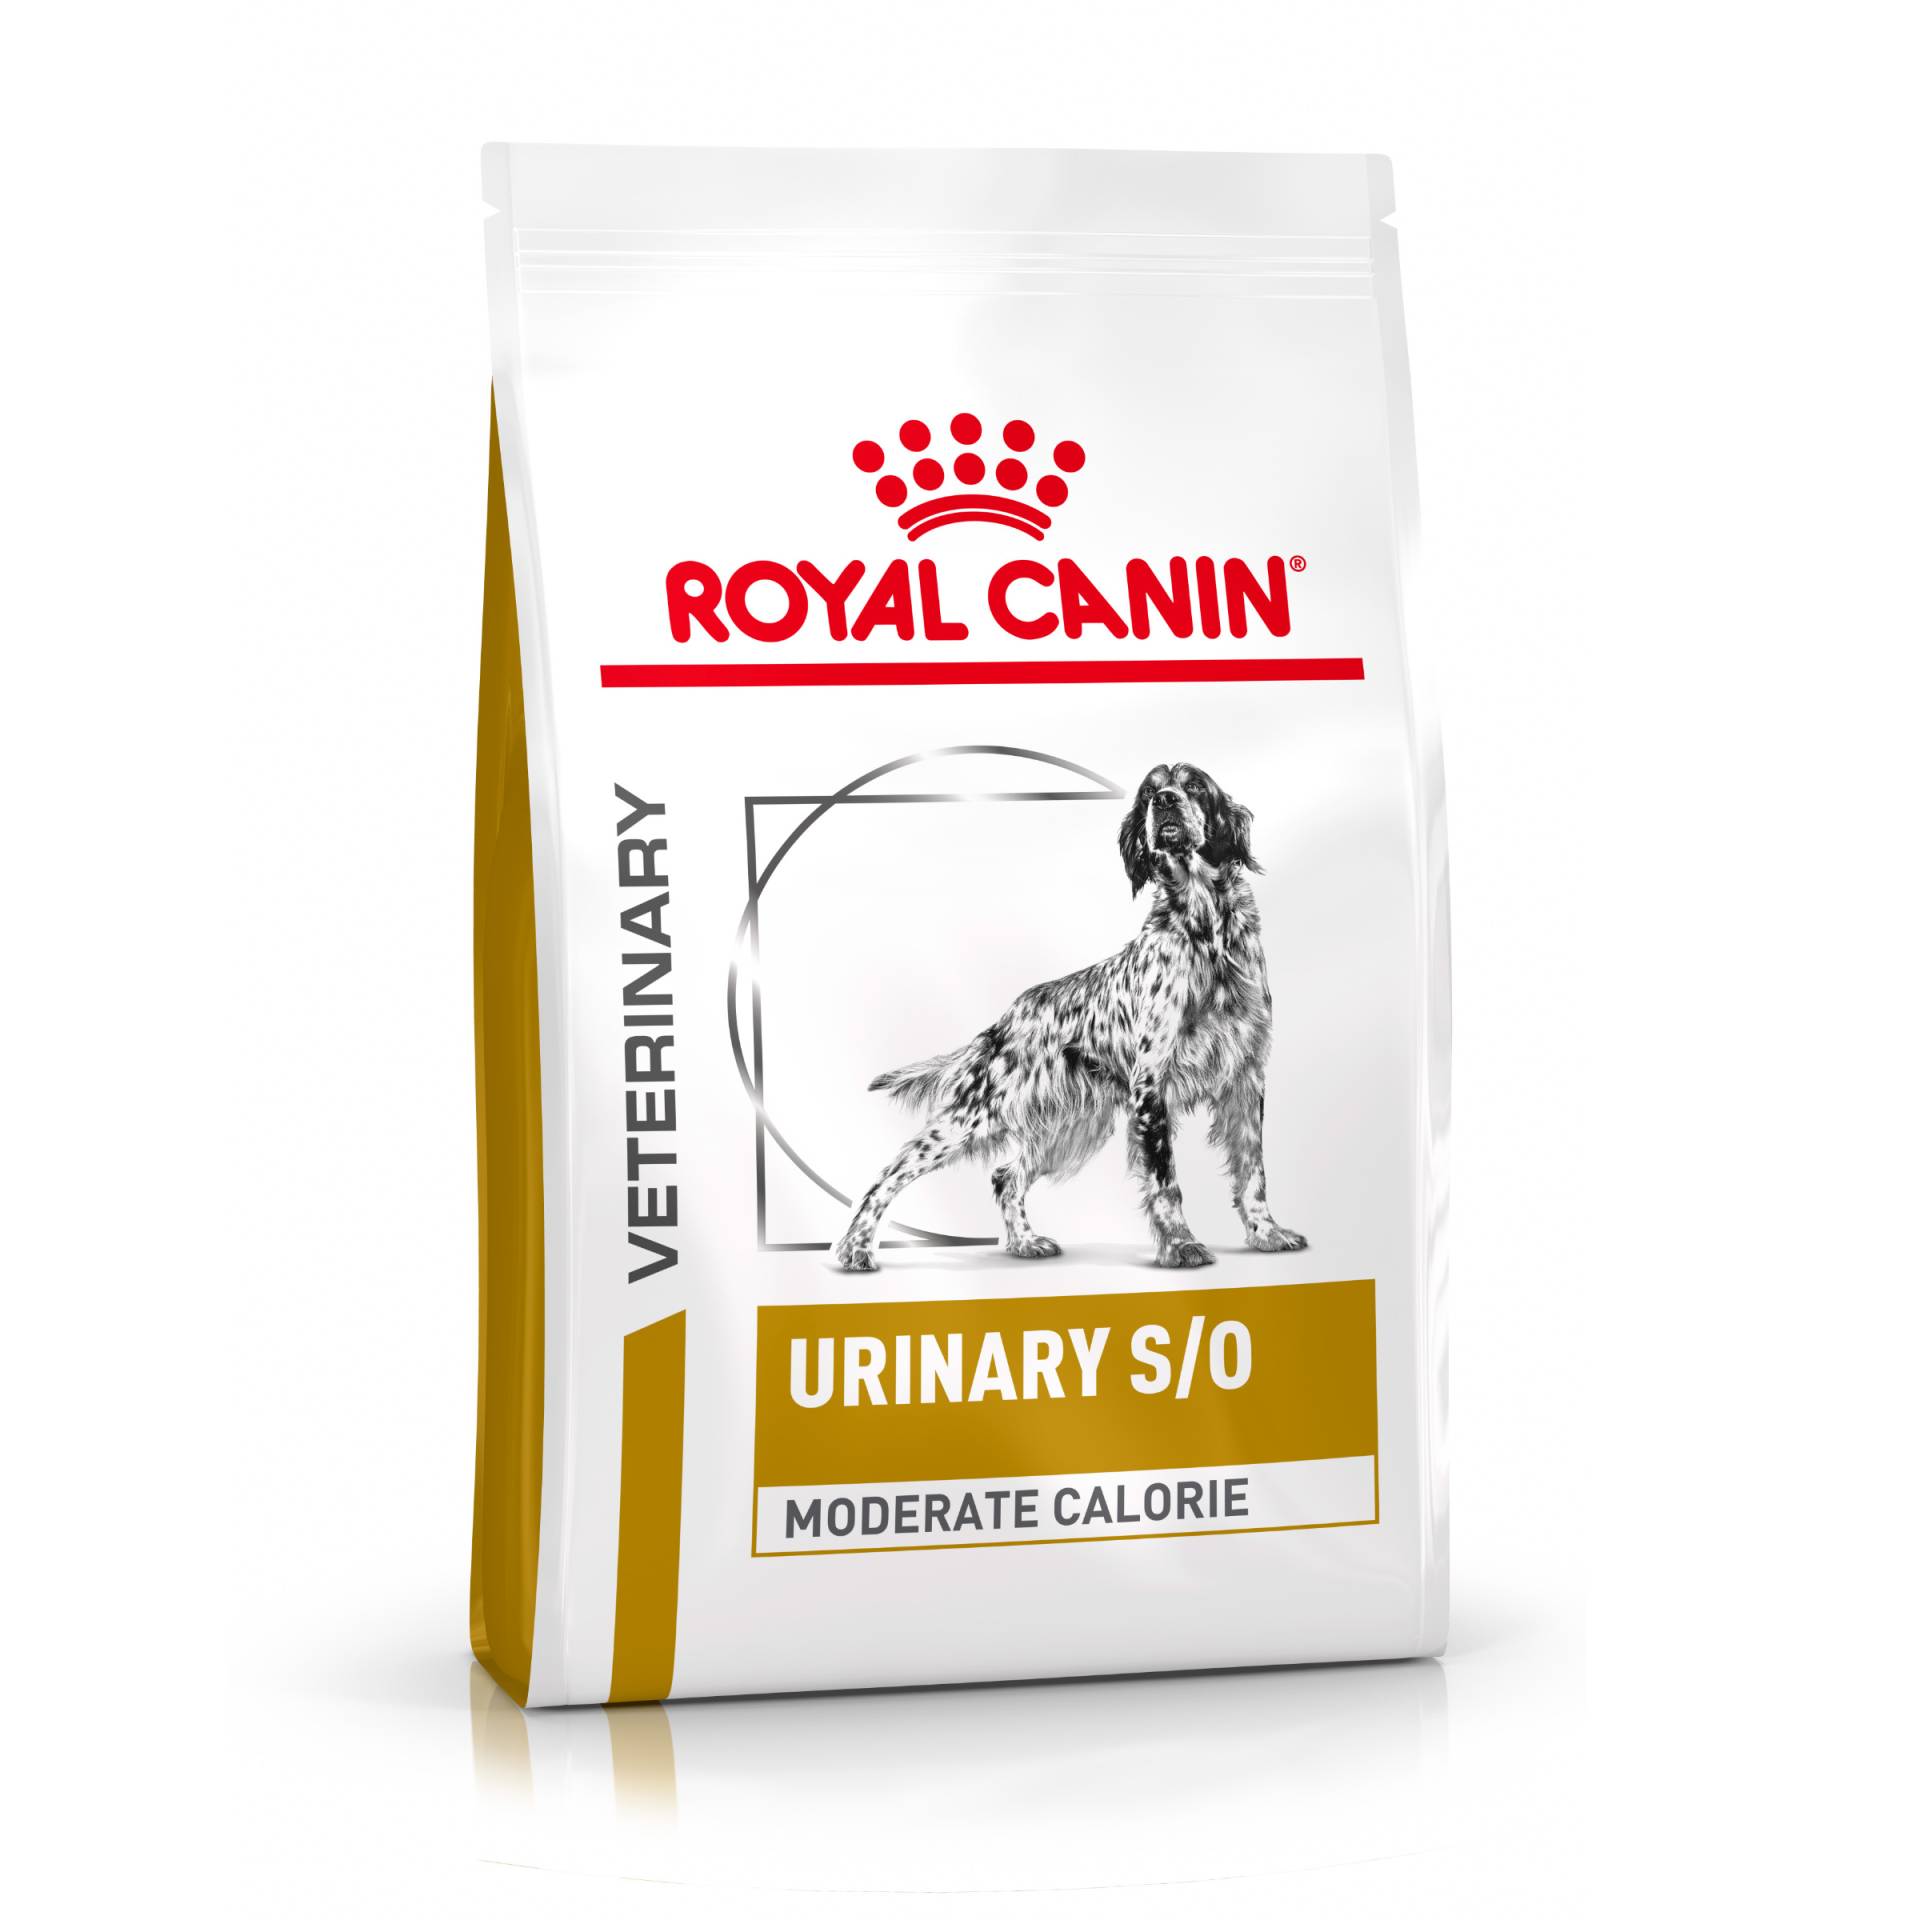 Royal Canin Veterinary Canine Urinary S/O Moderate Calorie - Sparpaket: 2 x 12 kg von Royal Canin Veterinary Diet